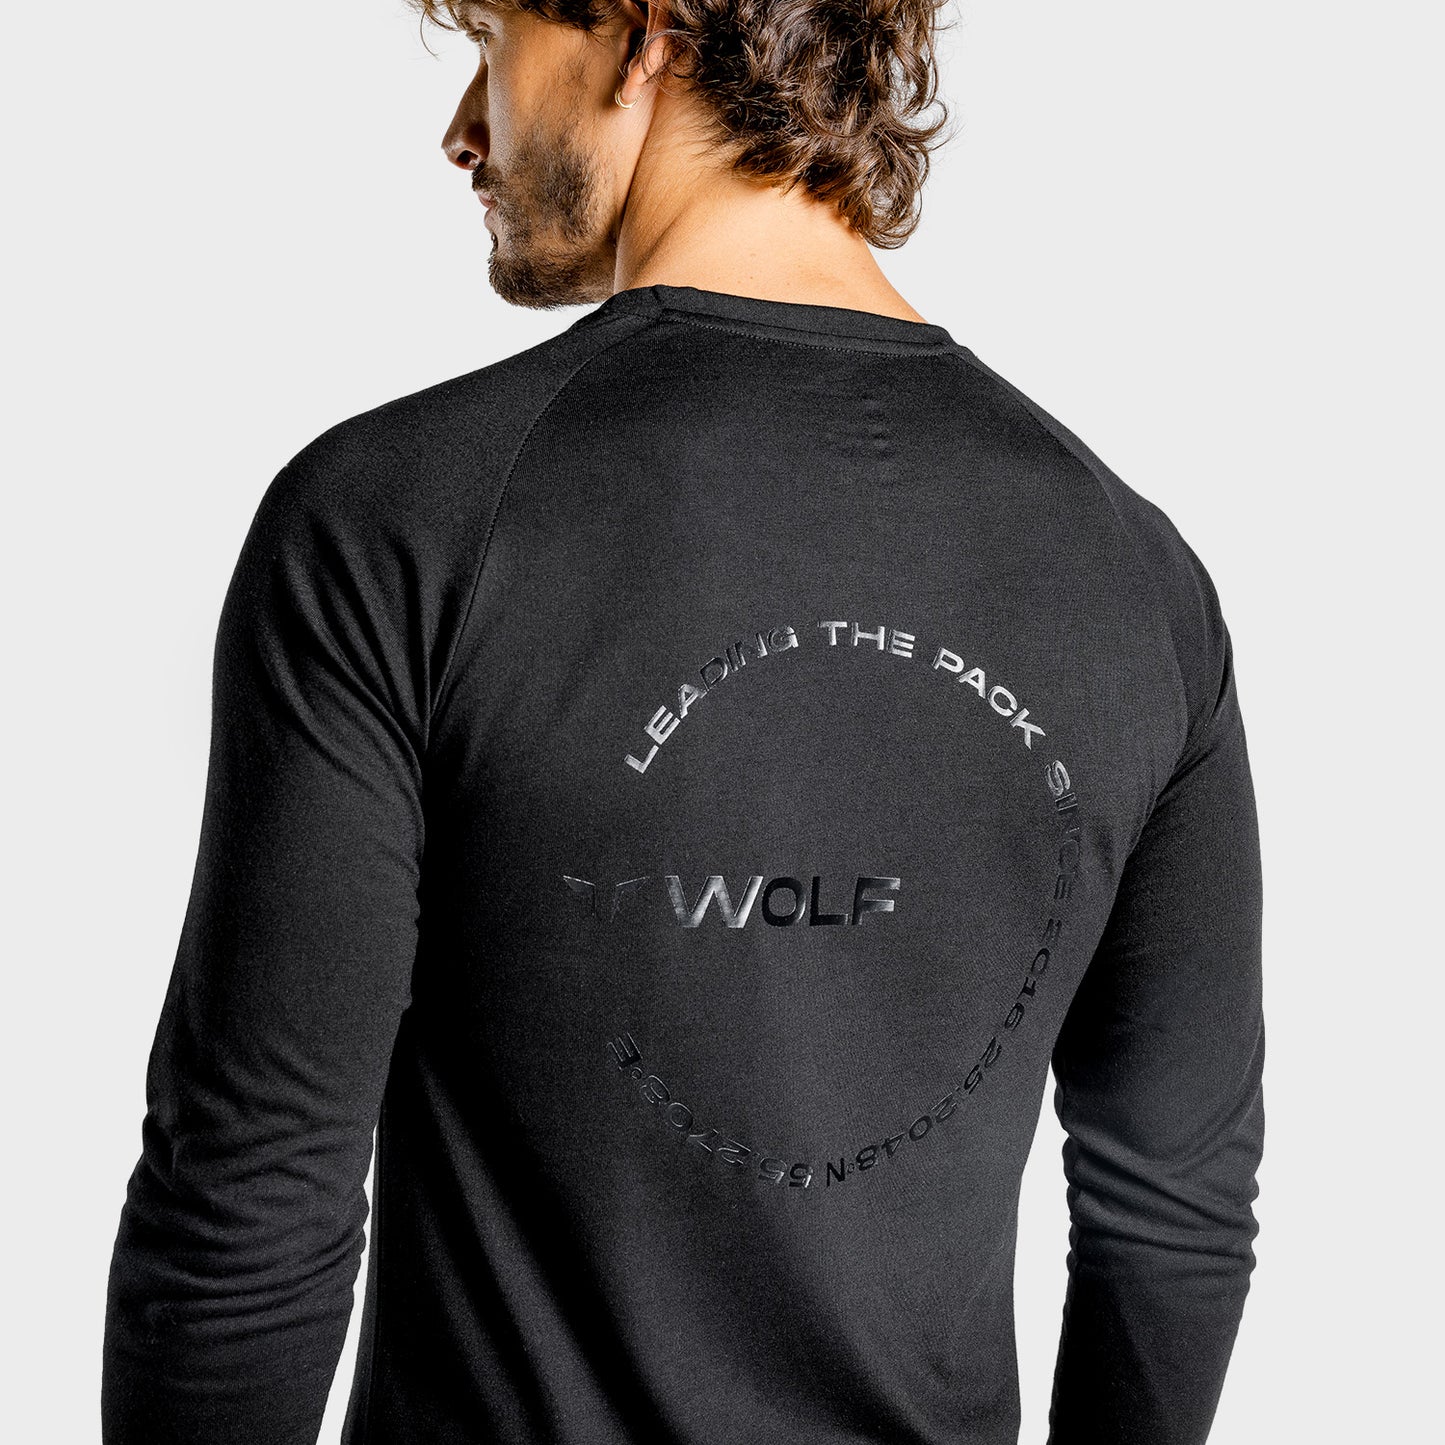 squatwolf-workout-shirts-for-men-luxe-long-sleeves-tee-black-gym-wear